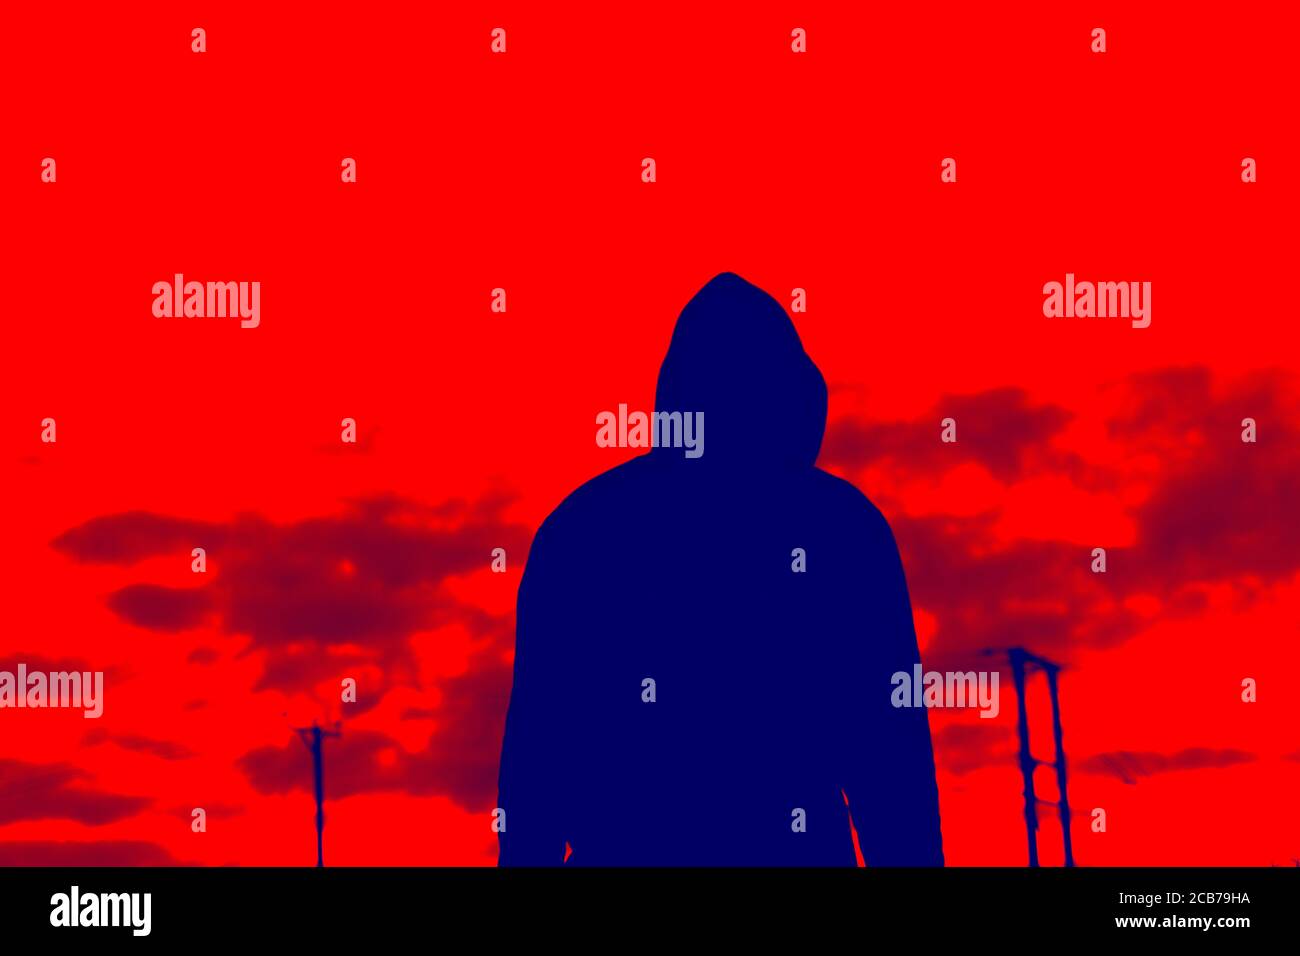 A blue, red duo tone edit. A hooded figure standing back to camera, looking at the sky. Stock Photo